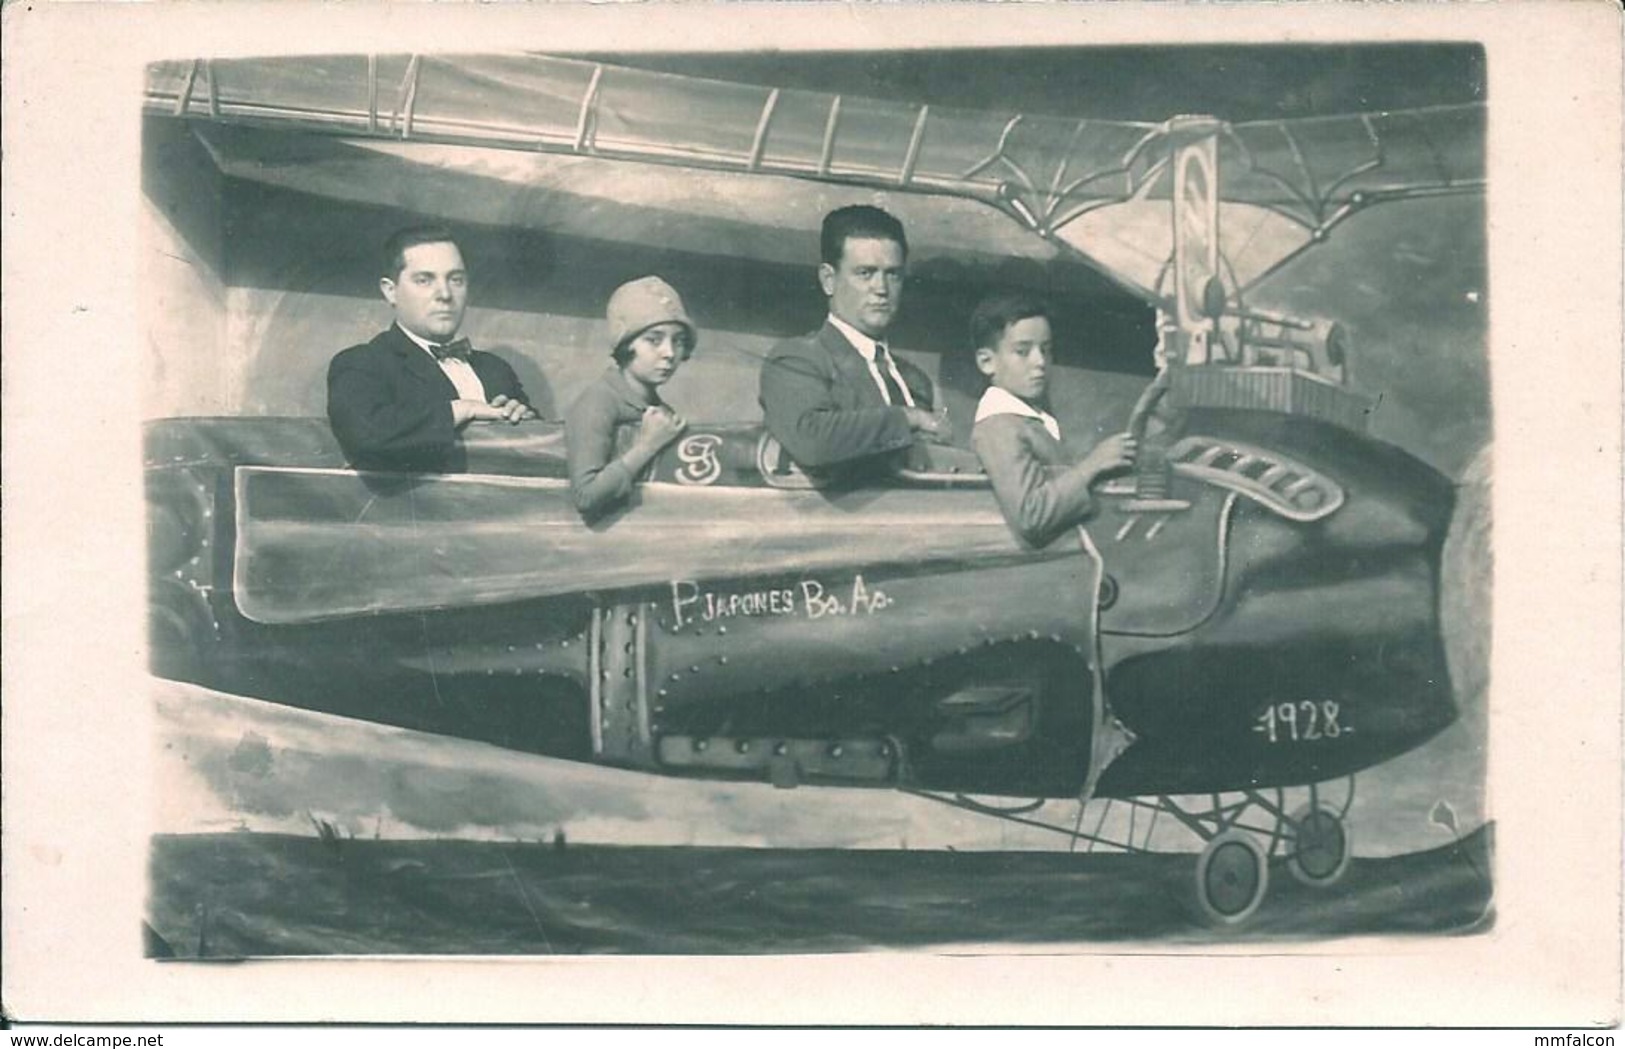 HUMOUR - AVIATION AVION AIRCRAFT AIRPLANE - SURREALISME Scénographie Photographique Hoomes Garcon Fille Flying CP 1928 - Aviation